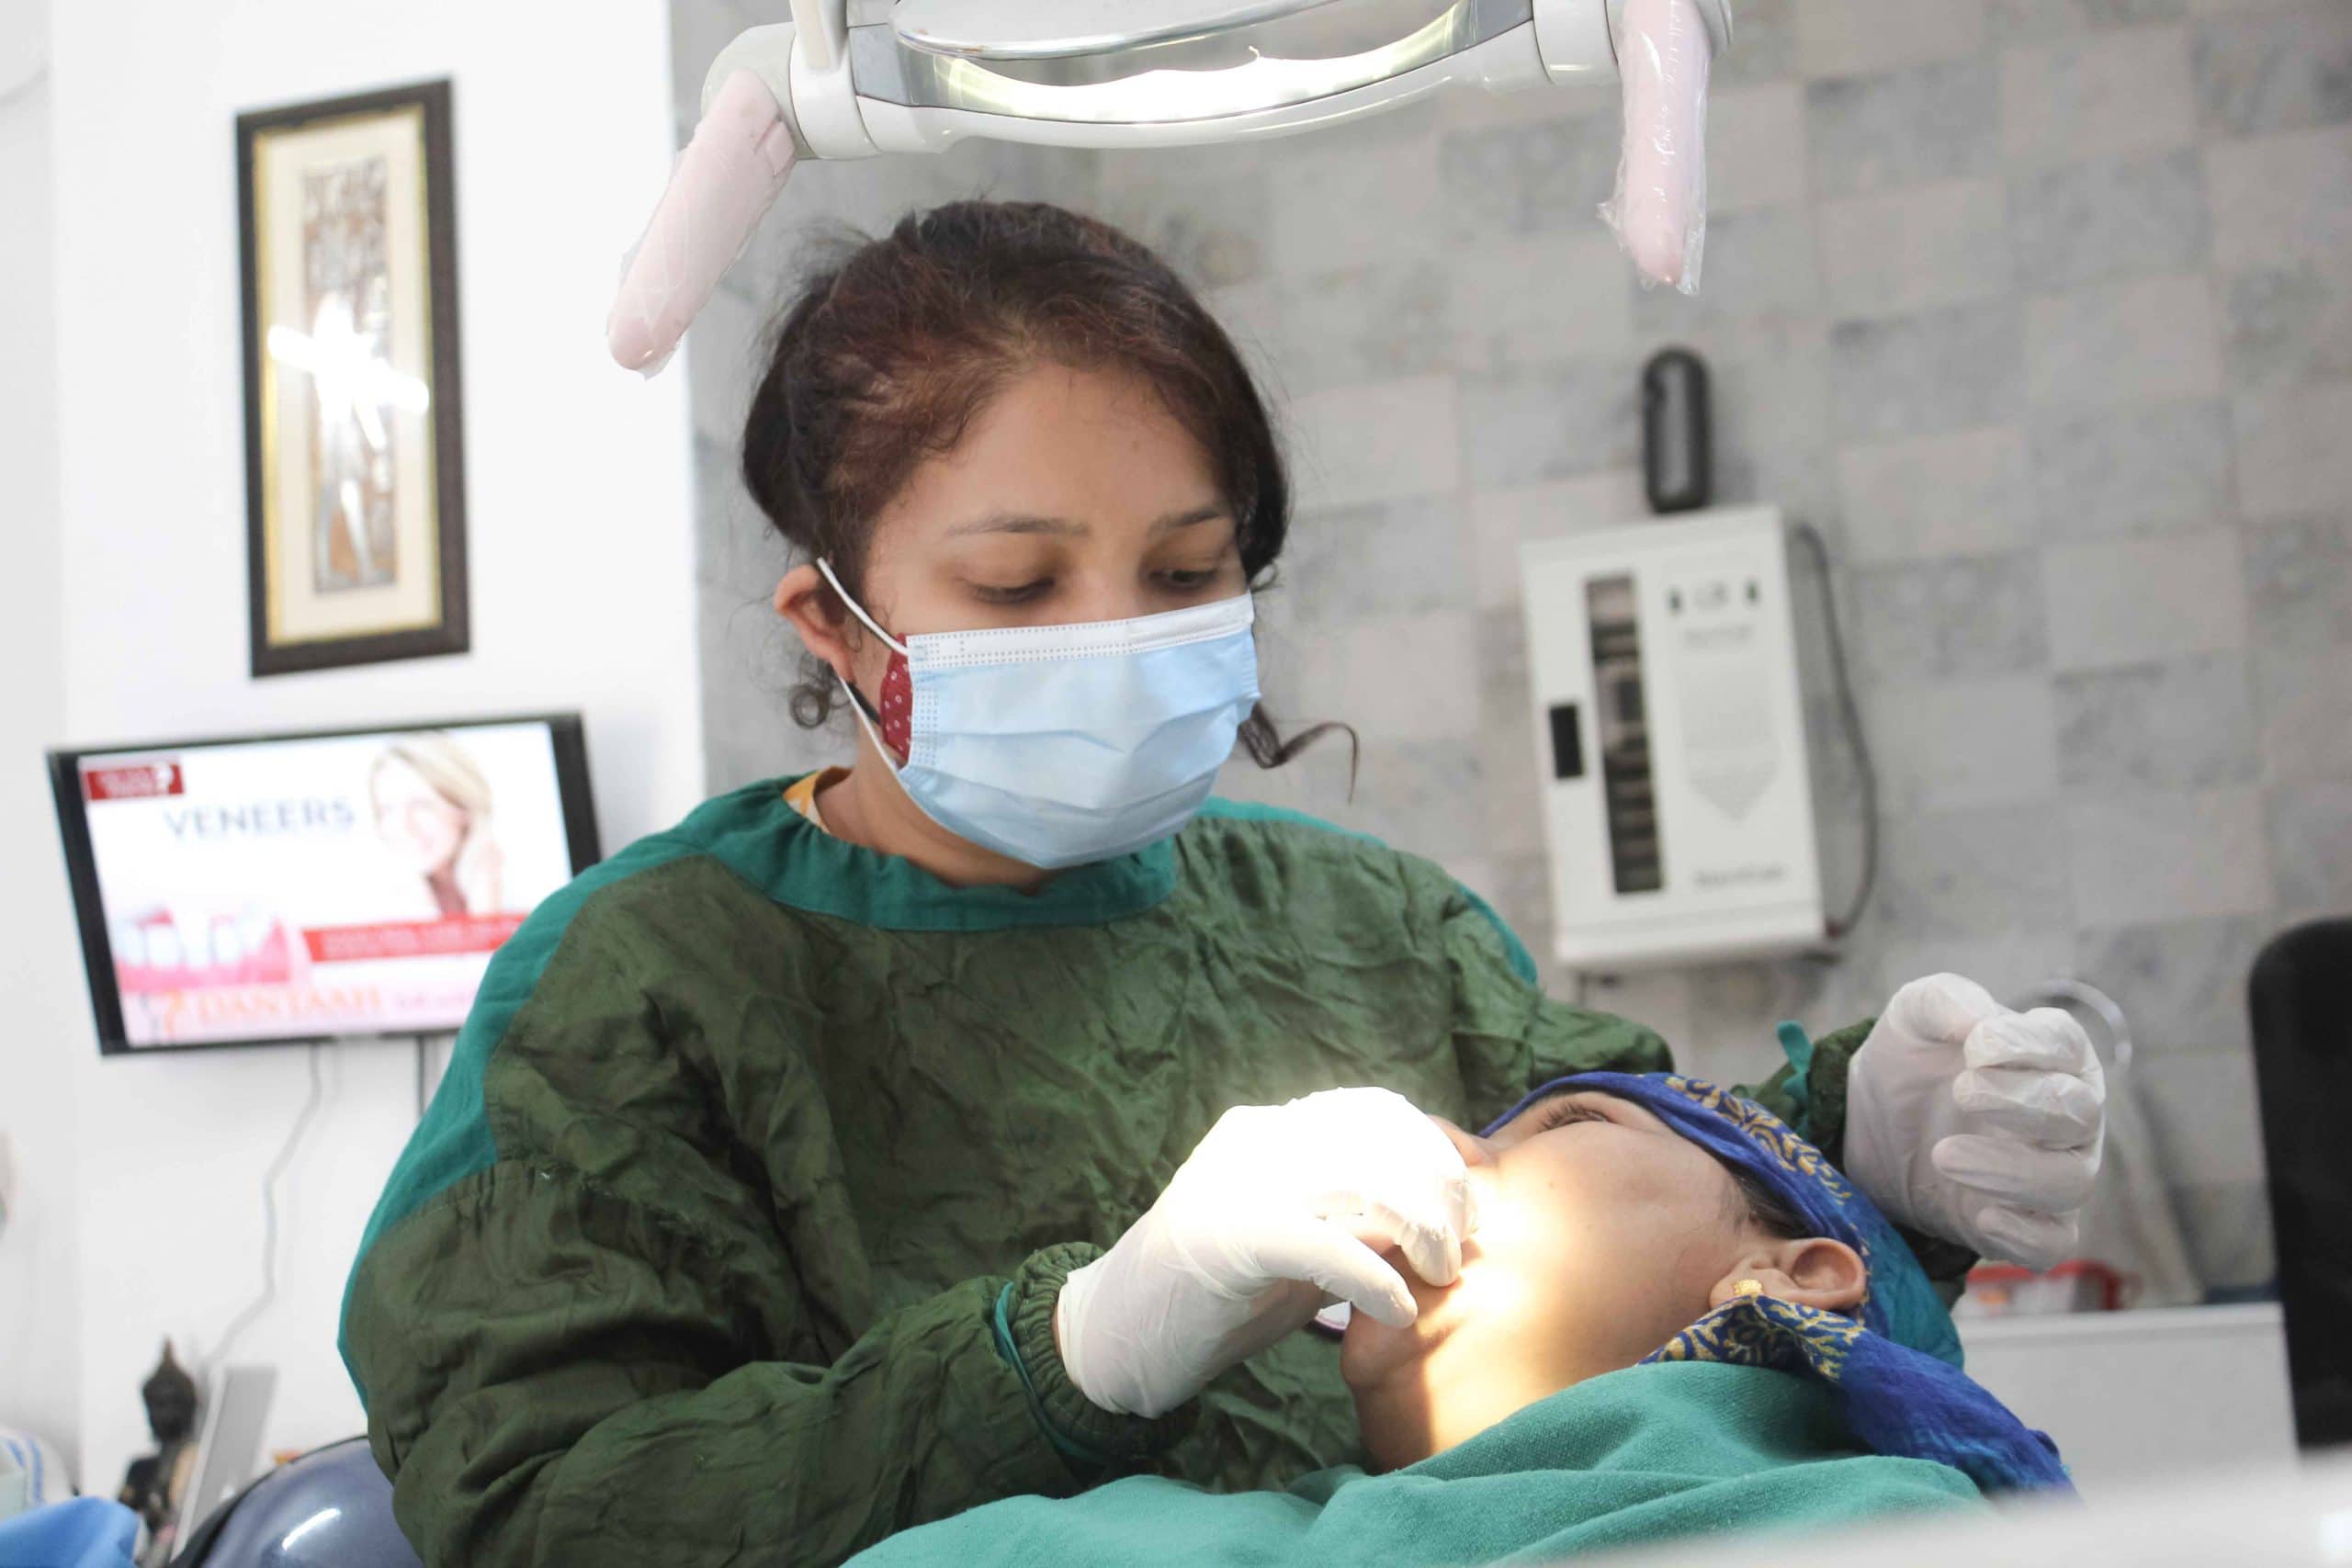 Best Dental Clinic in Ahmedabad, Dental Clinic near me with fees Dentist: Best dental clinic in Ahmedabad | Cosmetic dentistry in Chandkheda Dentist: Best dental clinic in Ahmedabad | Cosmetic dentistry in Chandkheda